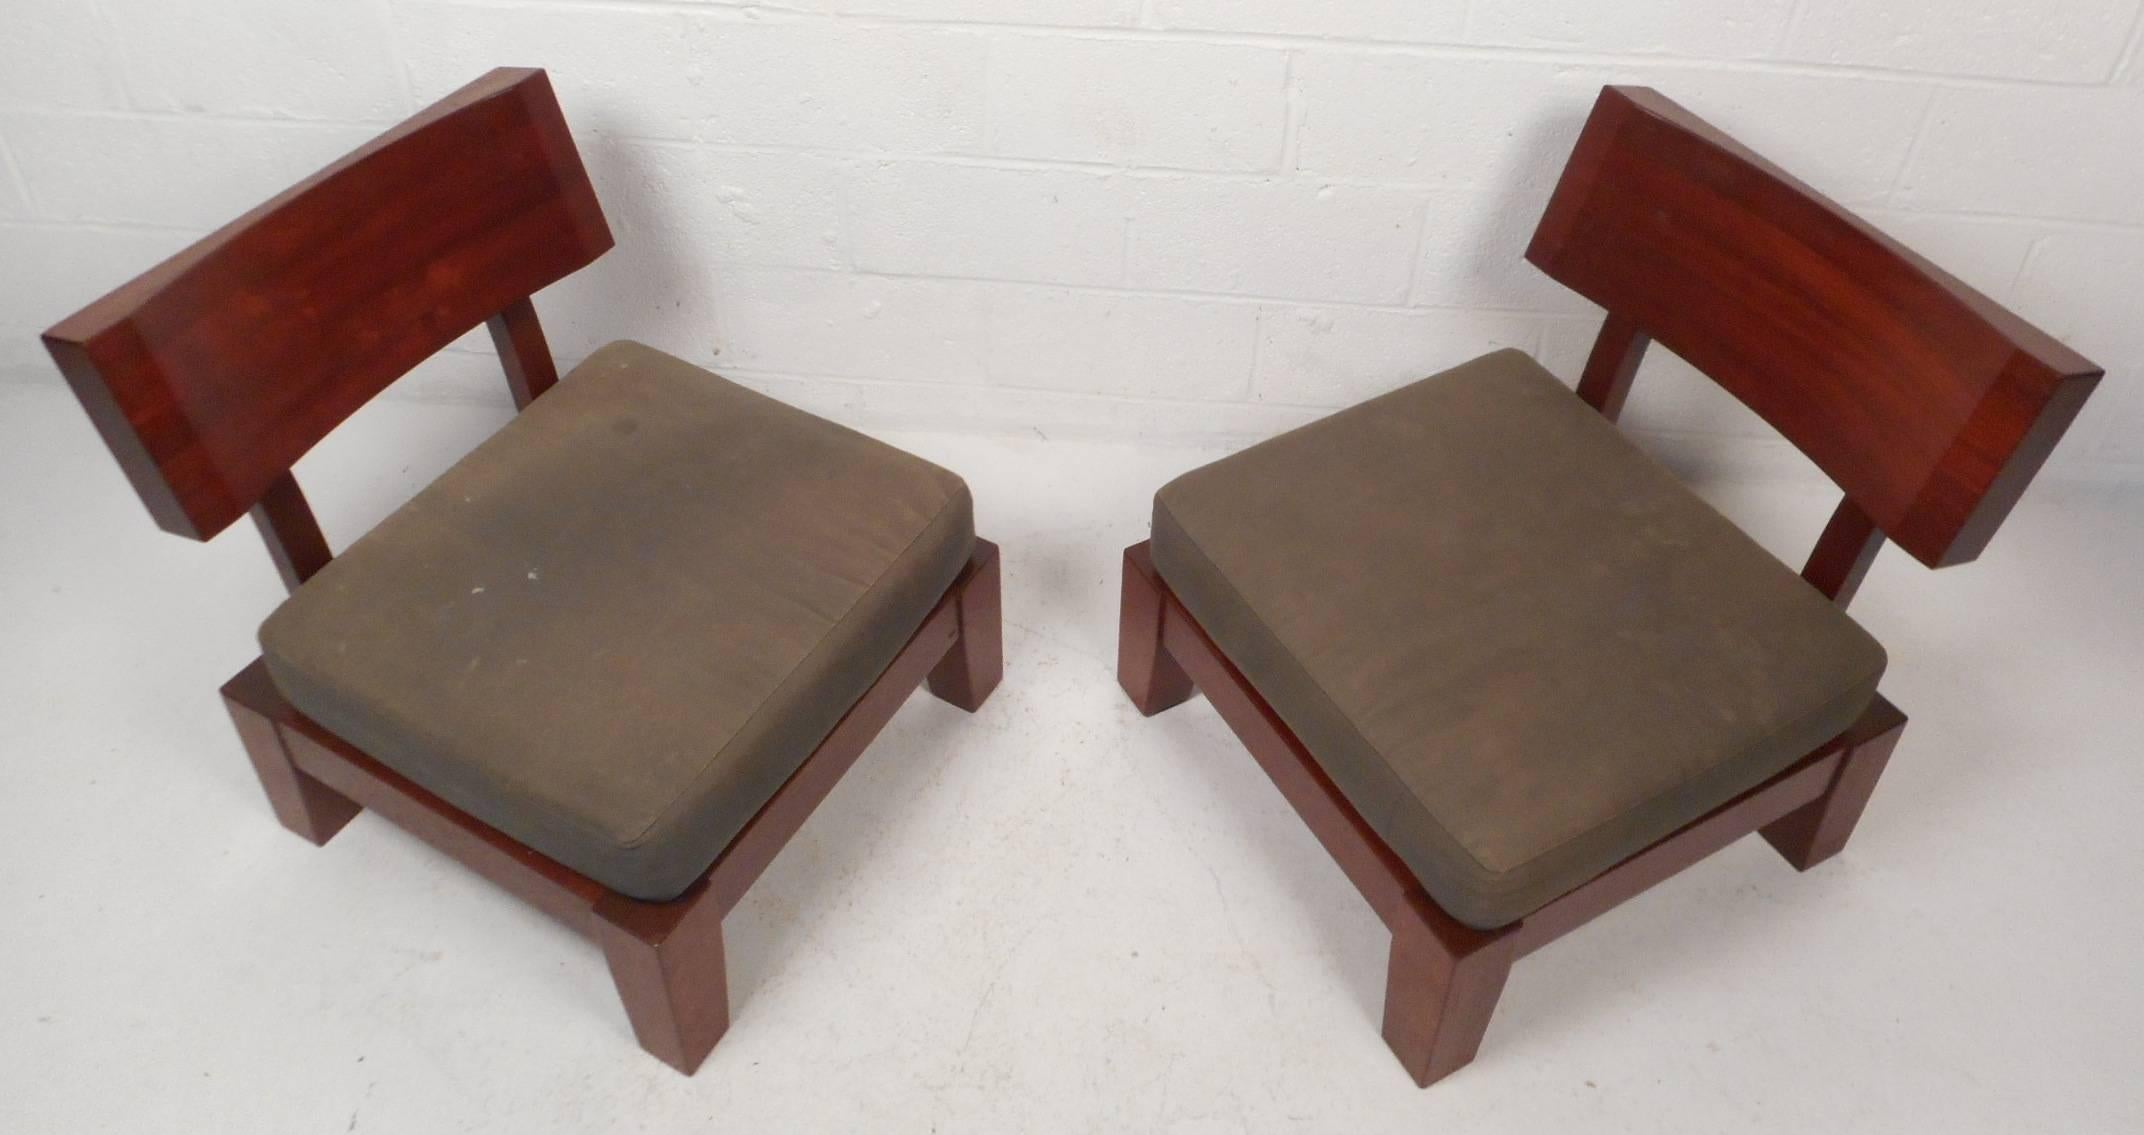 This gorgeous pair of vintage modern lounge chairs feature a unique backrest with beveled sides. Solid construction with elegant wood grain and thick padded seat cushions. Sleek and sturdy design is sure to compliment any seating arrangement. Please